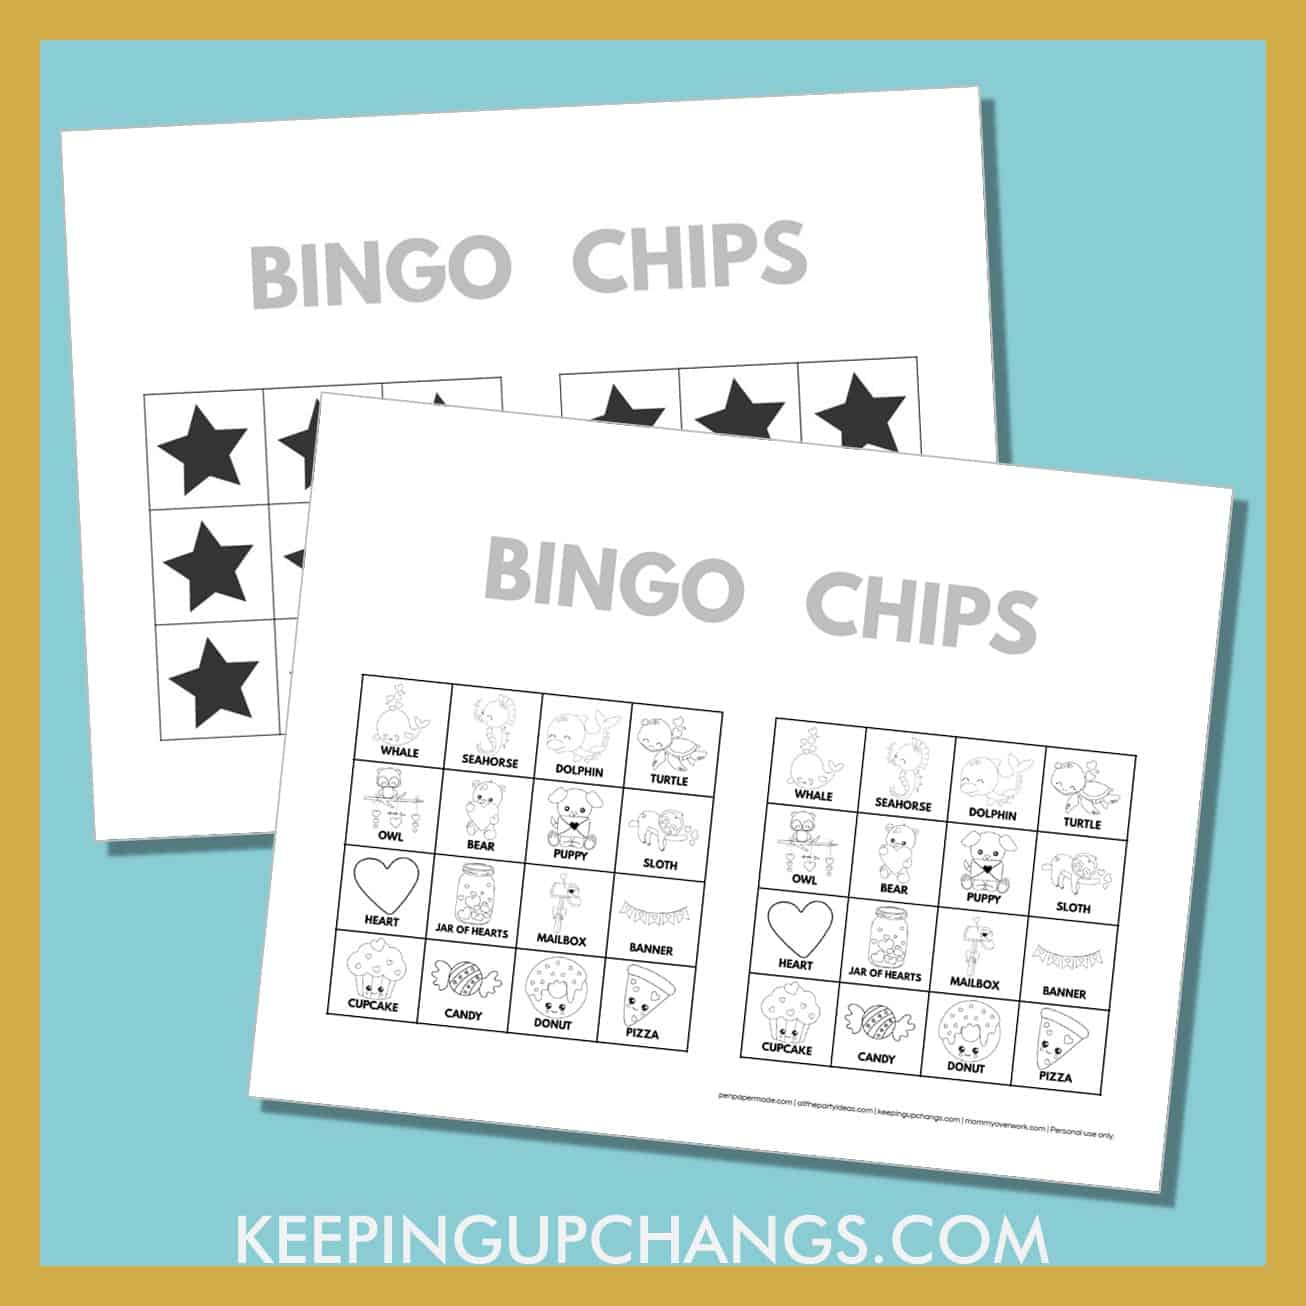 free valentine's day bingo card 4x4 black white coloring game chips, tokens, markers.